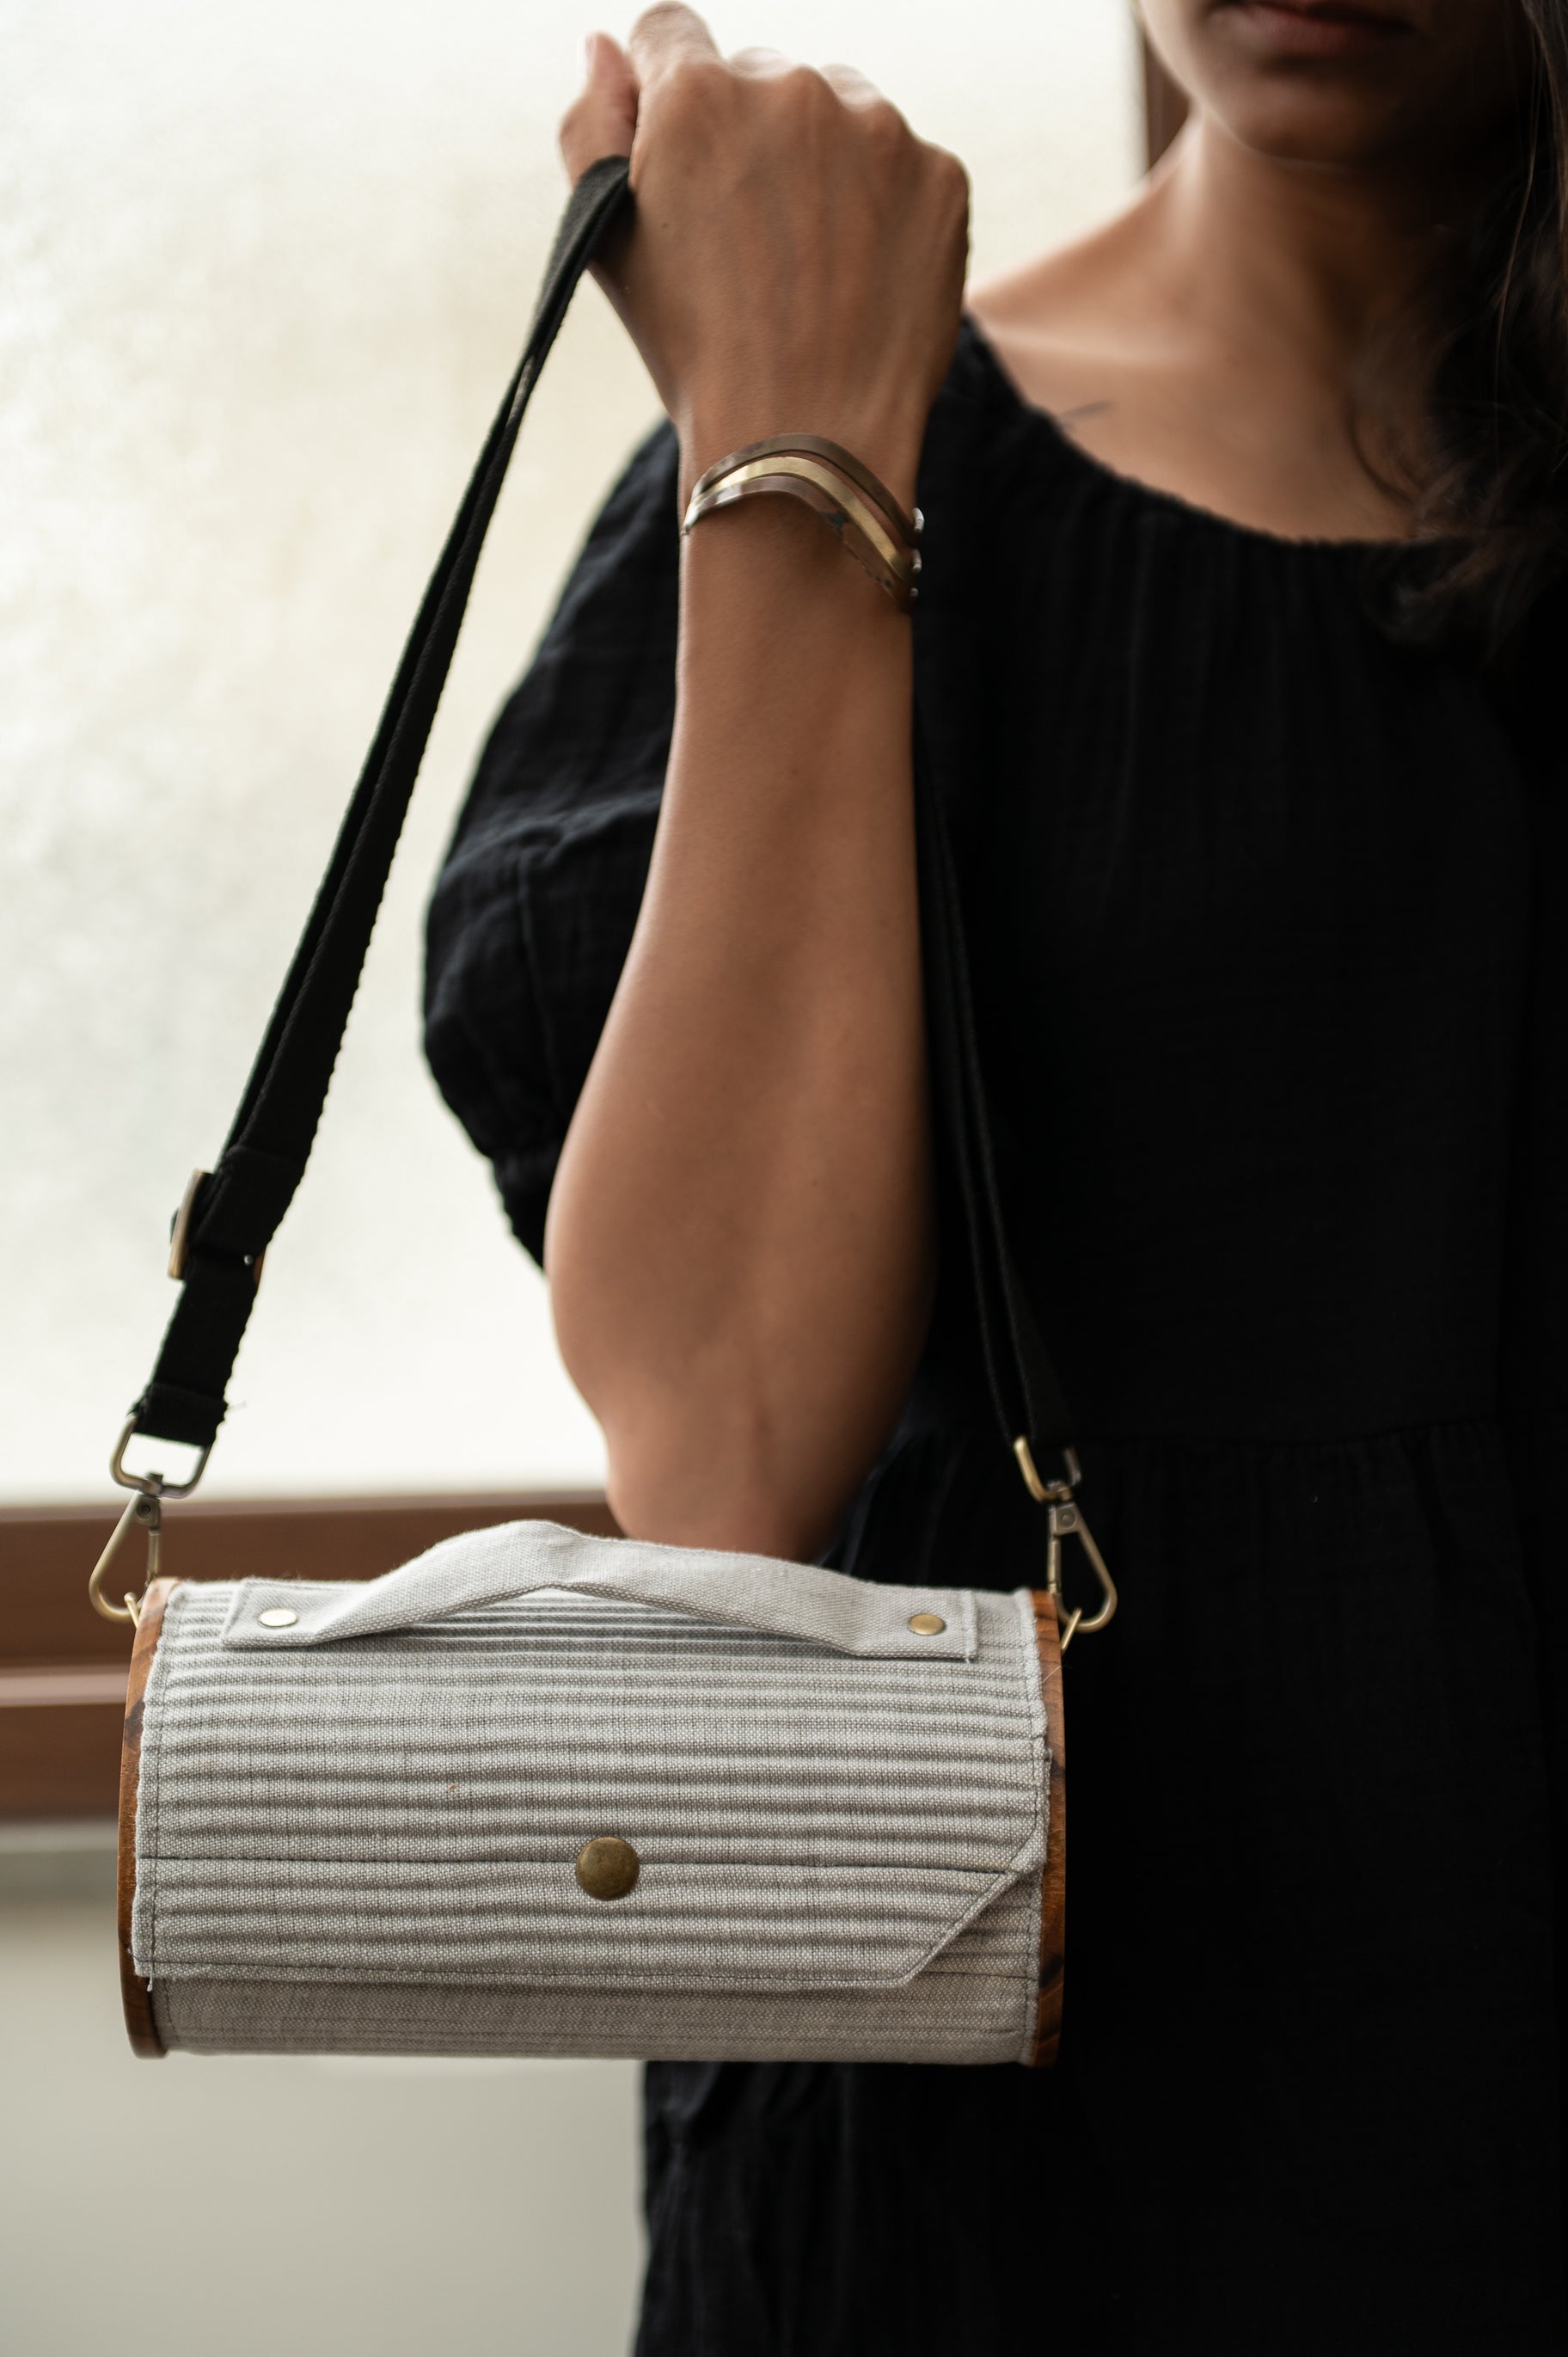 JW PEI Is The Affordable Accessories Label To Covet